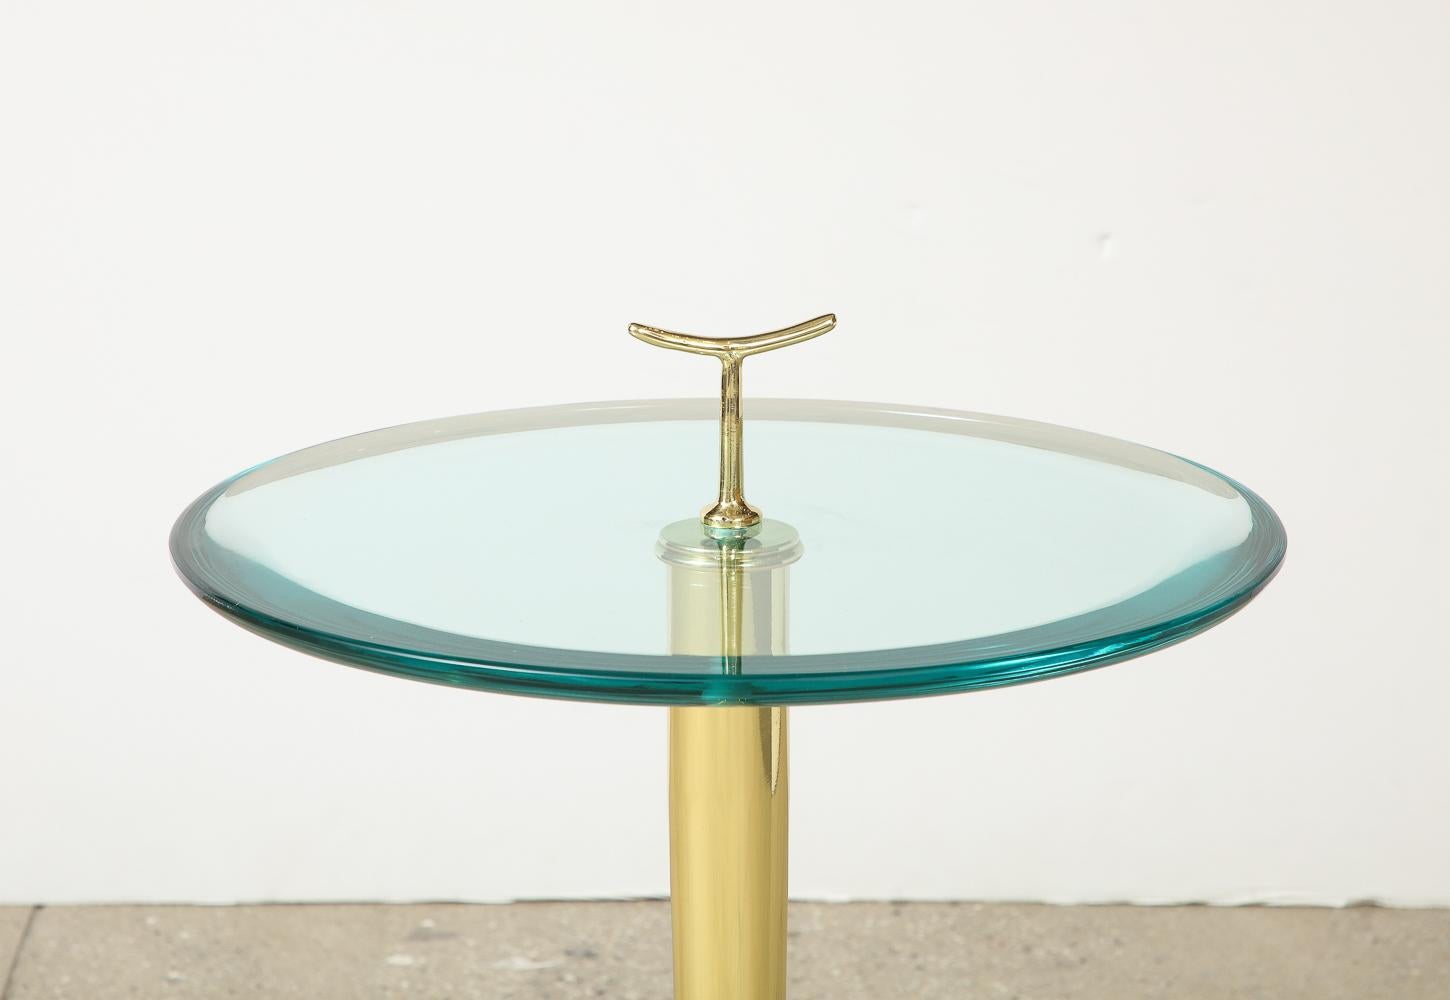 Polished brass structure with 3-pronged foot and stylized finial or handle. Thick, circular glass table surface with elegant beveled edge. Great details throughout.

Dimensions: 
Height of tabletop: 22